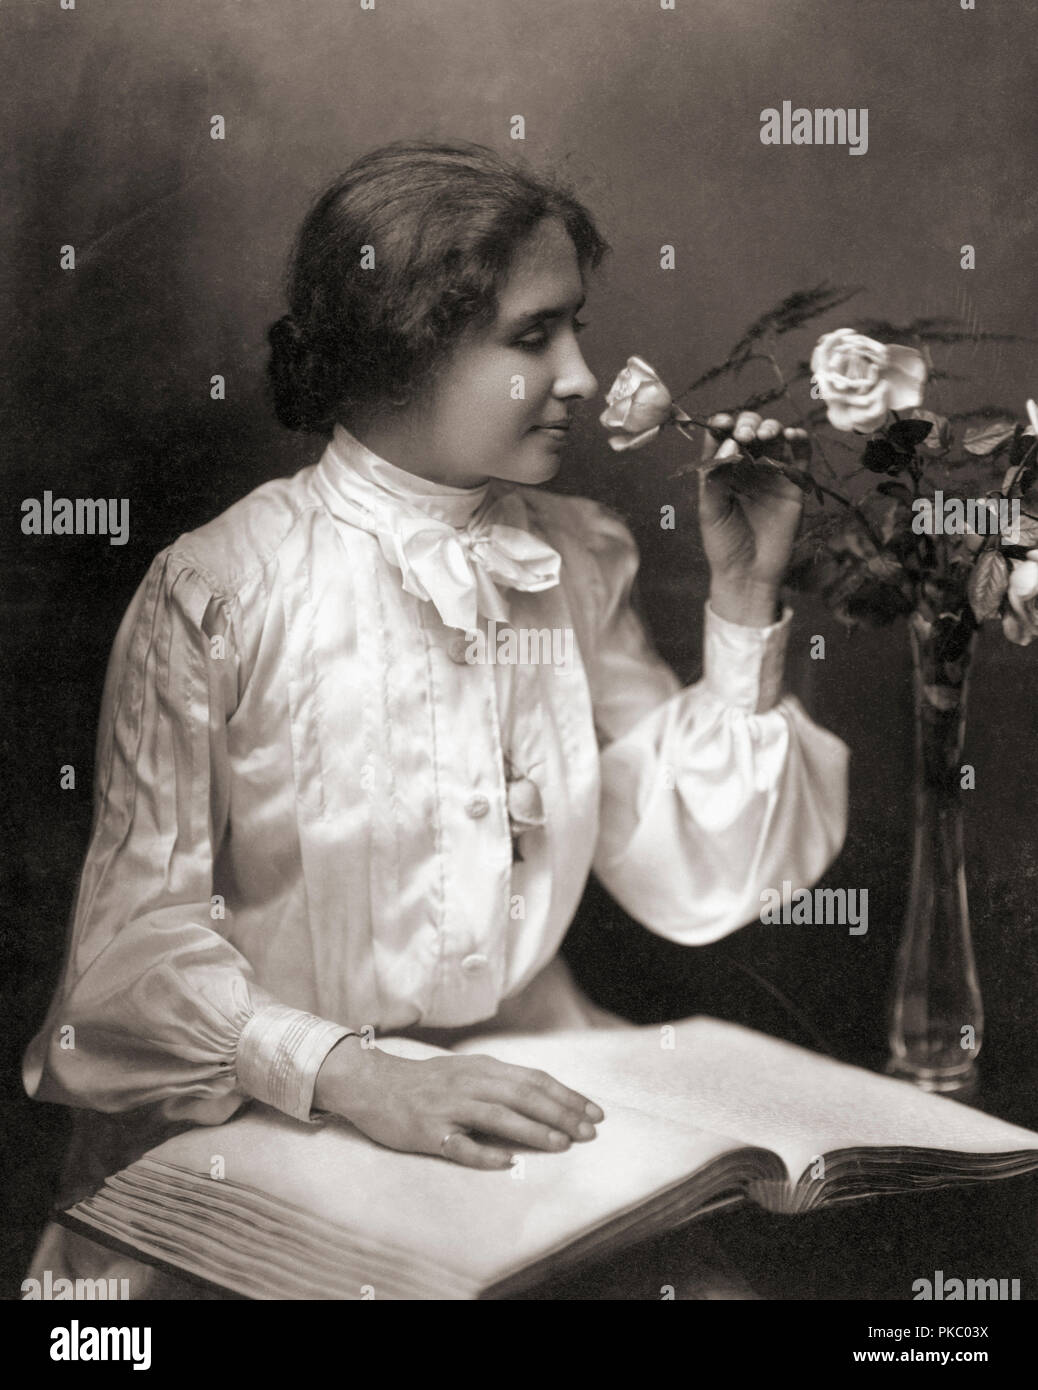 Helen Keller, 1880-1968.  Though deaf and blind, Helen Keller graduated from Harvard University’s Radcliffe College with a Bachelor of Arts degree.  Her story became widely known through the play and film The Miracle Worker. Stock Photo